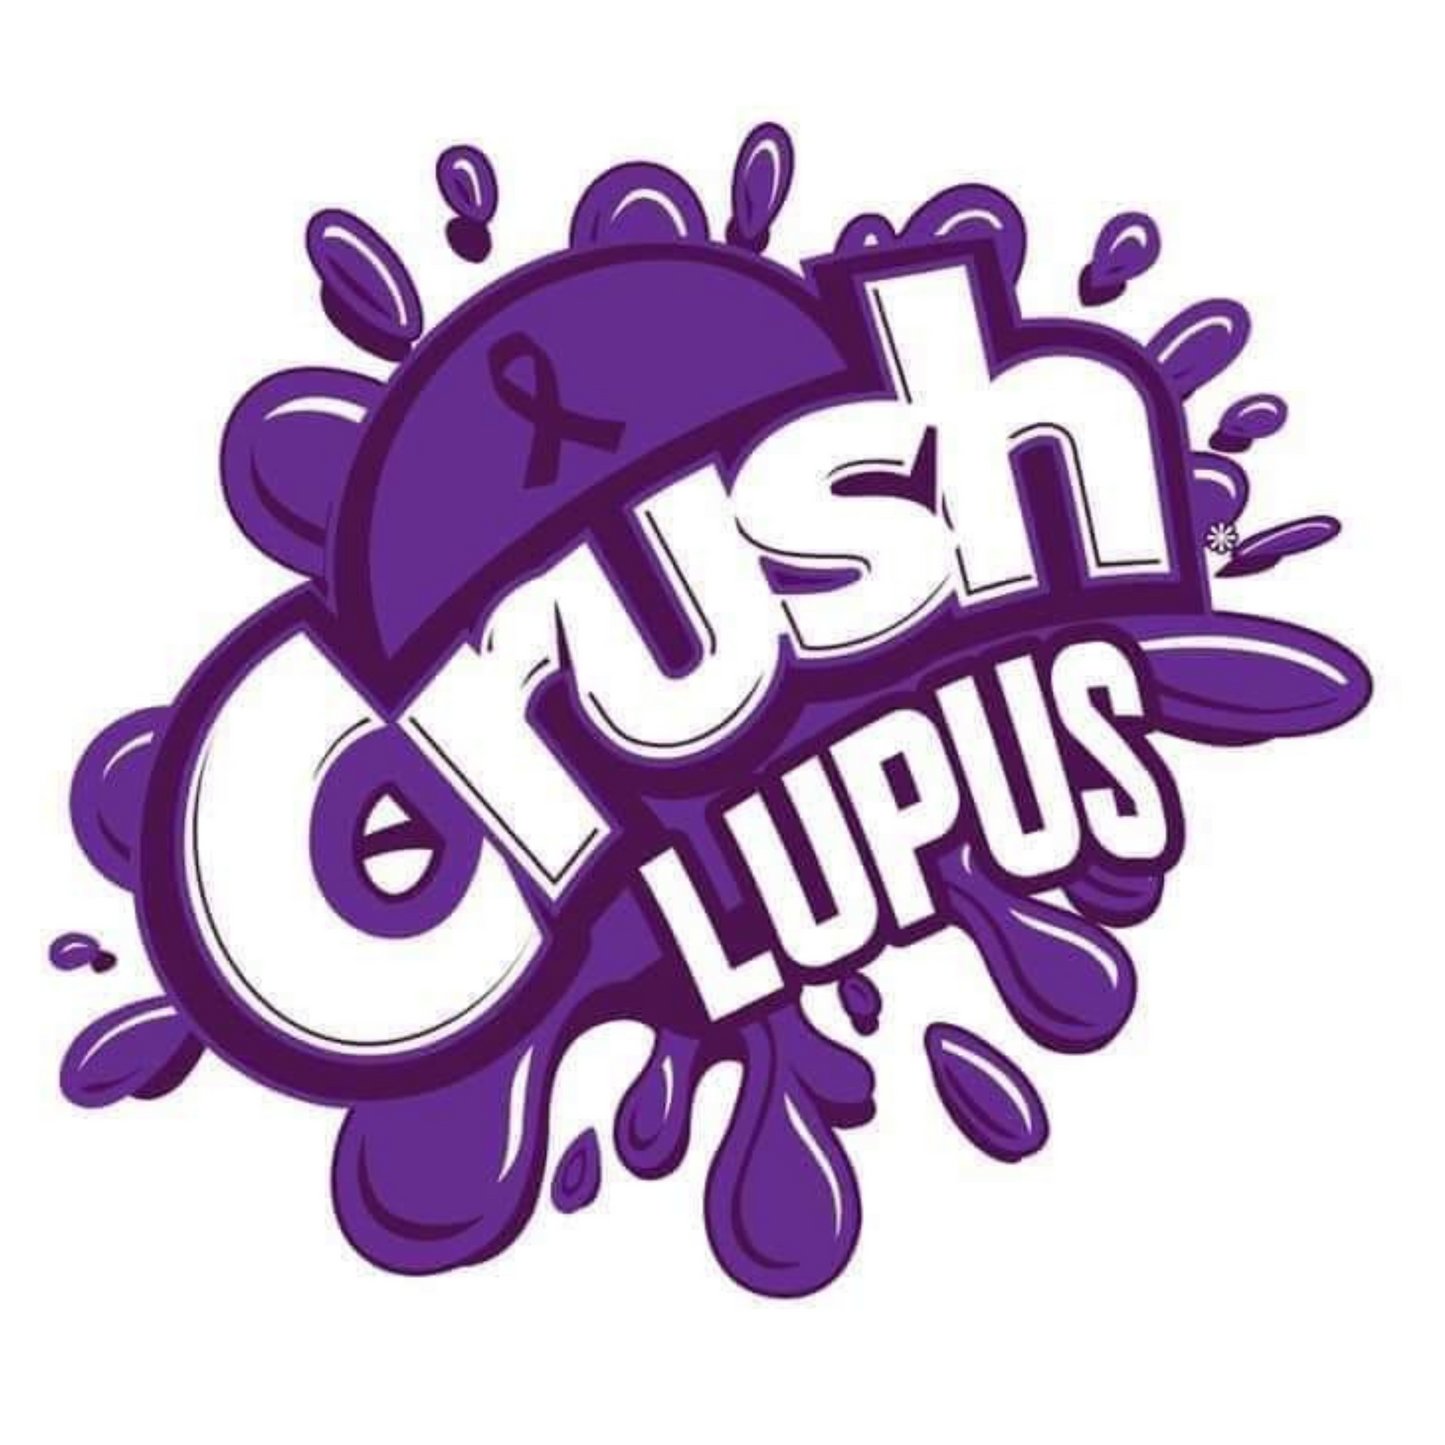 CRUSH AWARENESS TEE'S - MANY OPTIONS AVAILABLE